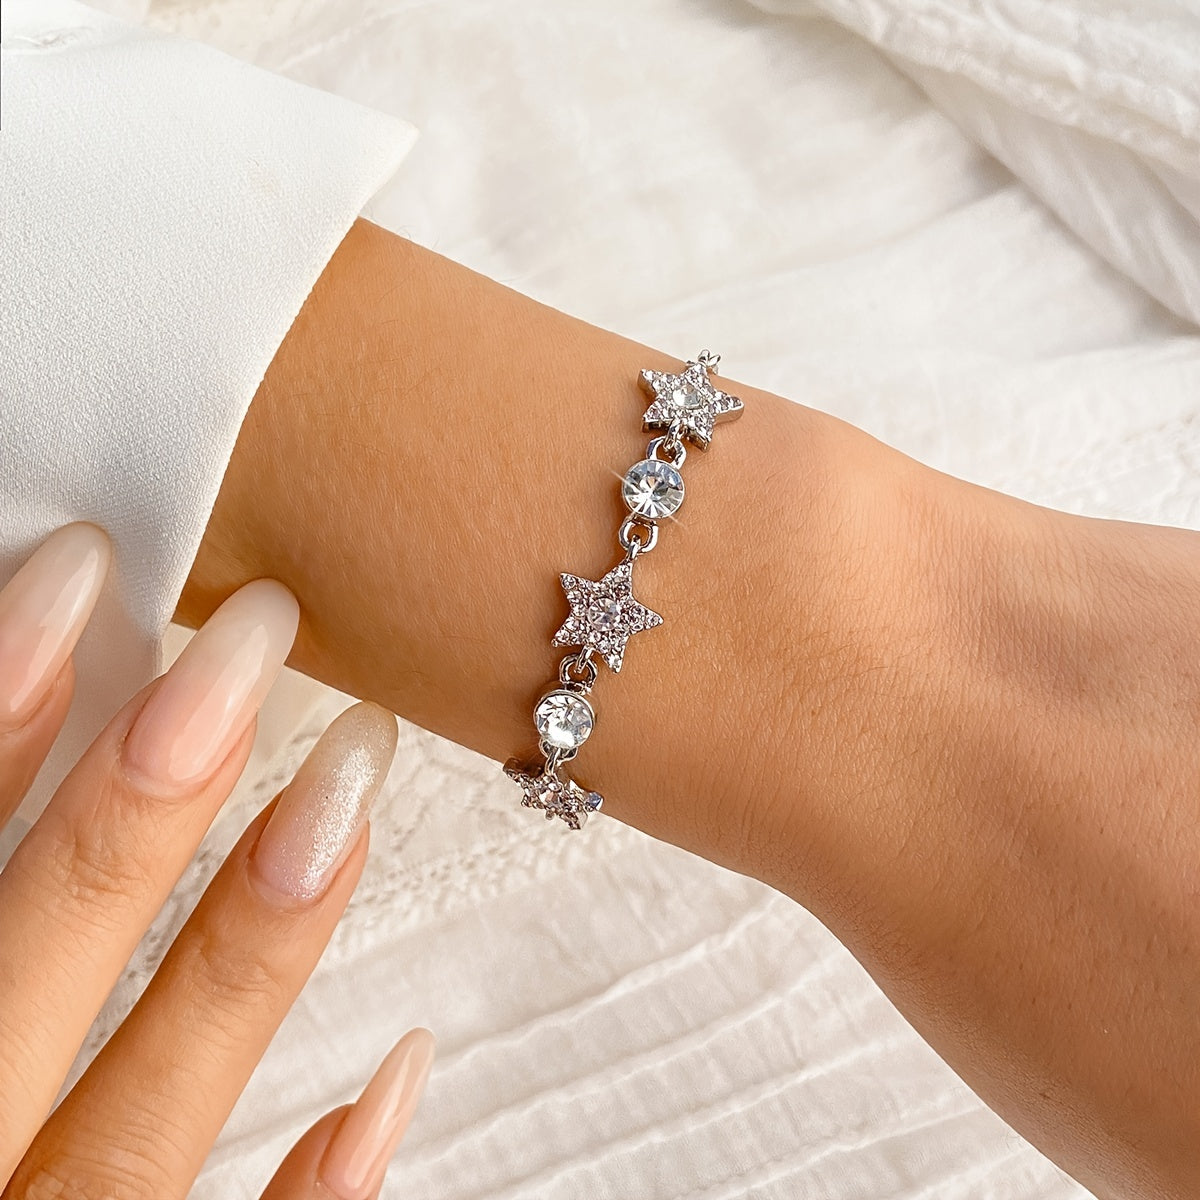 Gorgeous Star-Shaped Rhinestone Bracelet - Perfect for Any Occasion!